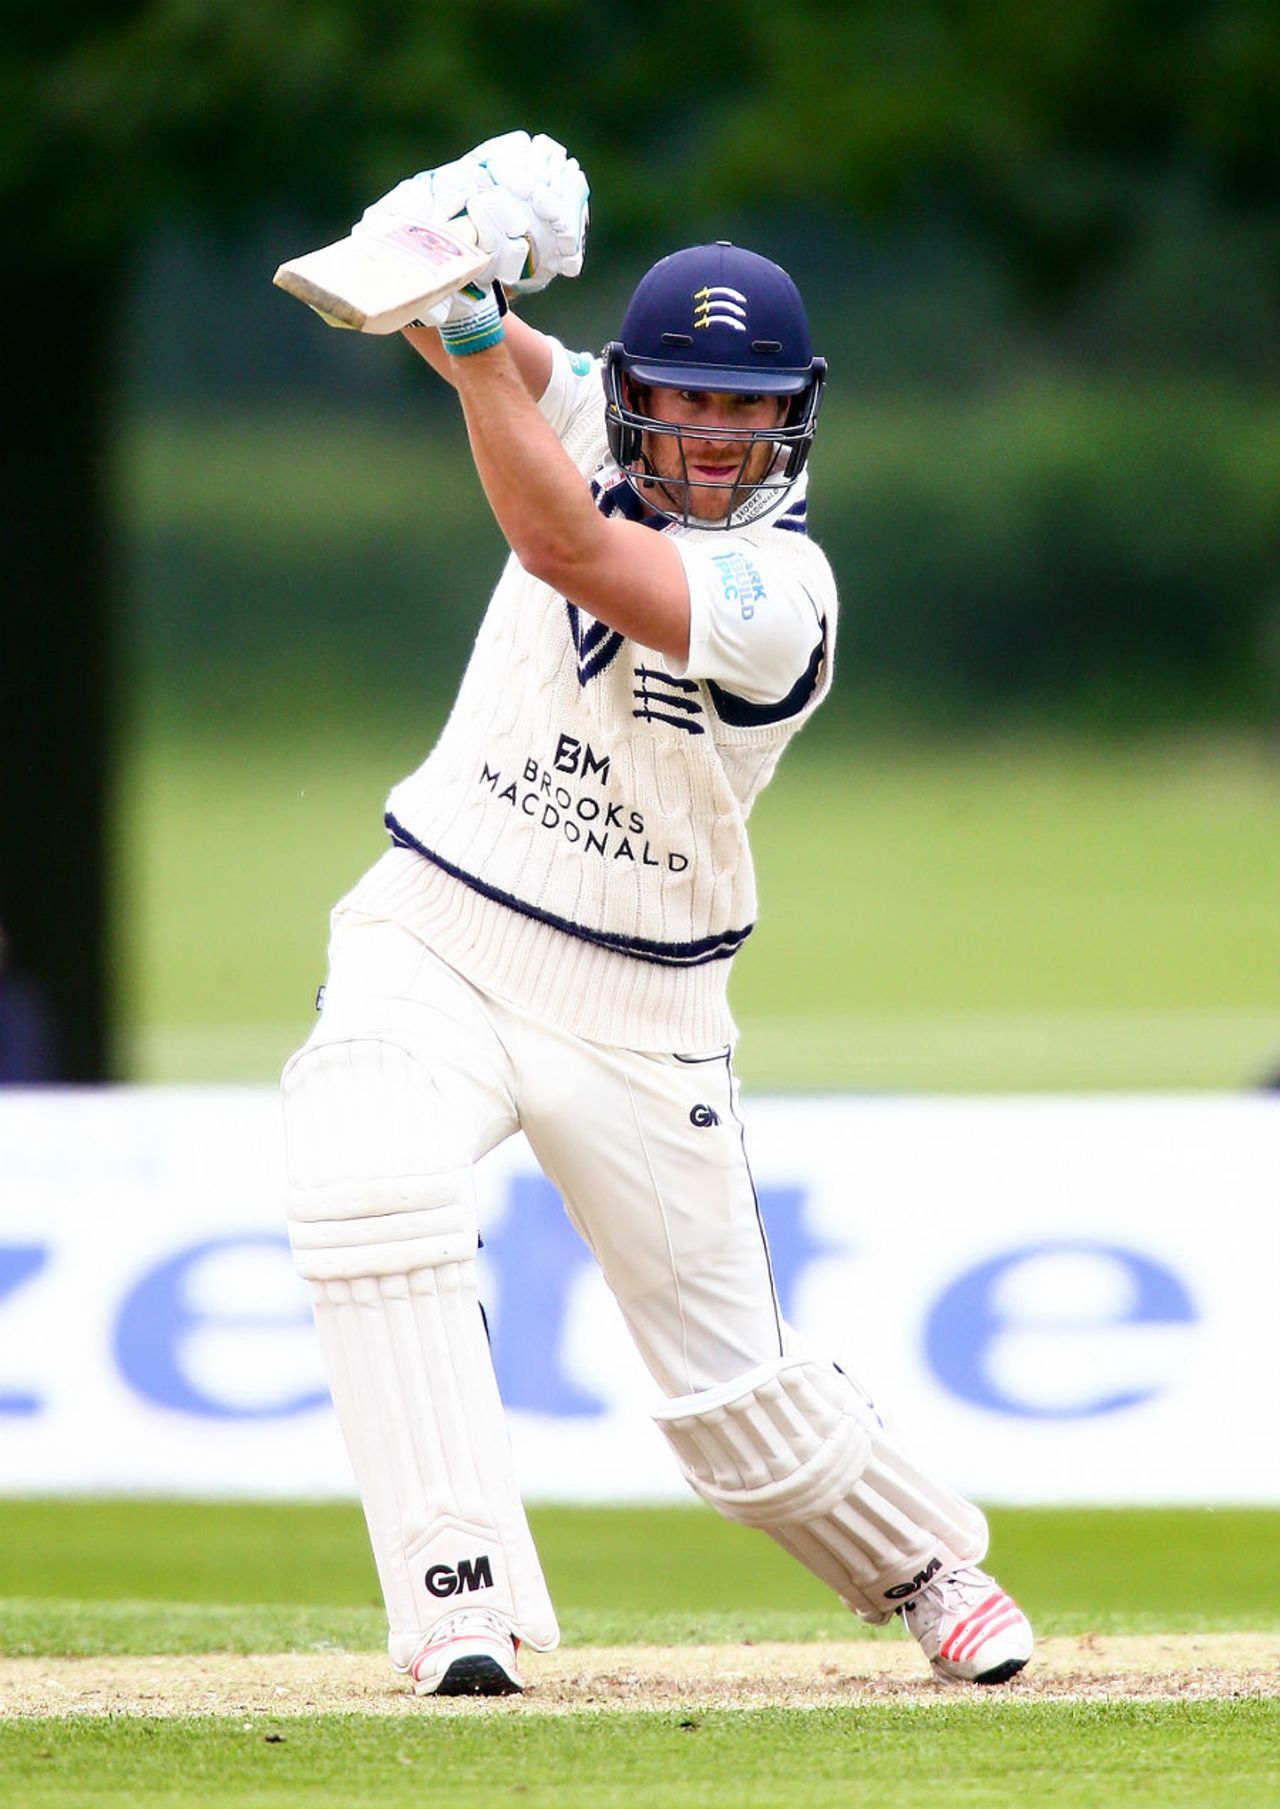 Dawid Malan drives through the covers, Middlesex v Hampshire, County Championship, Division One, Merchant Taylors' School, 1st day, May 29, 2016